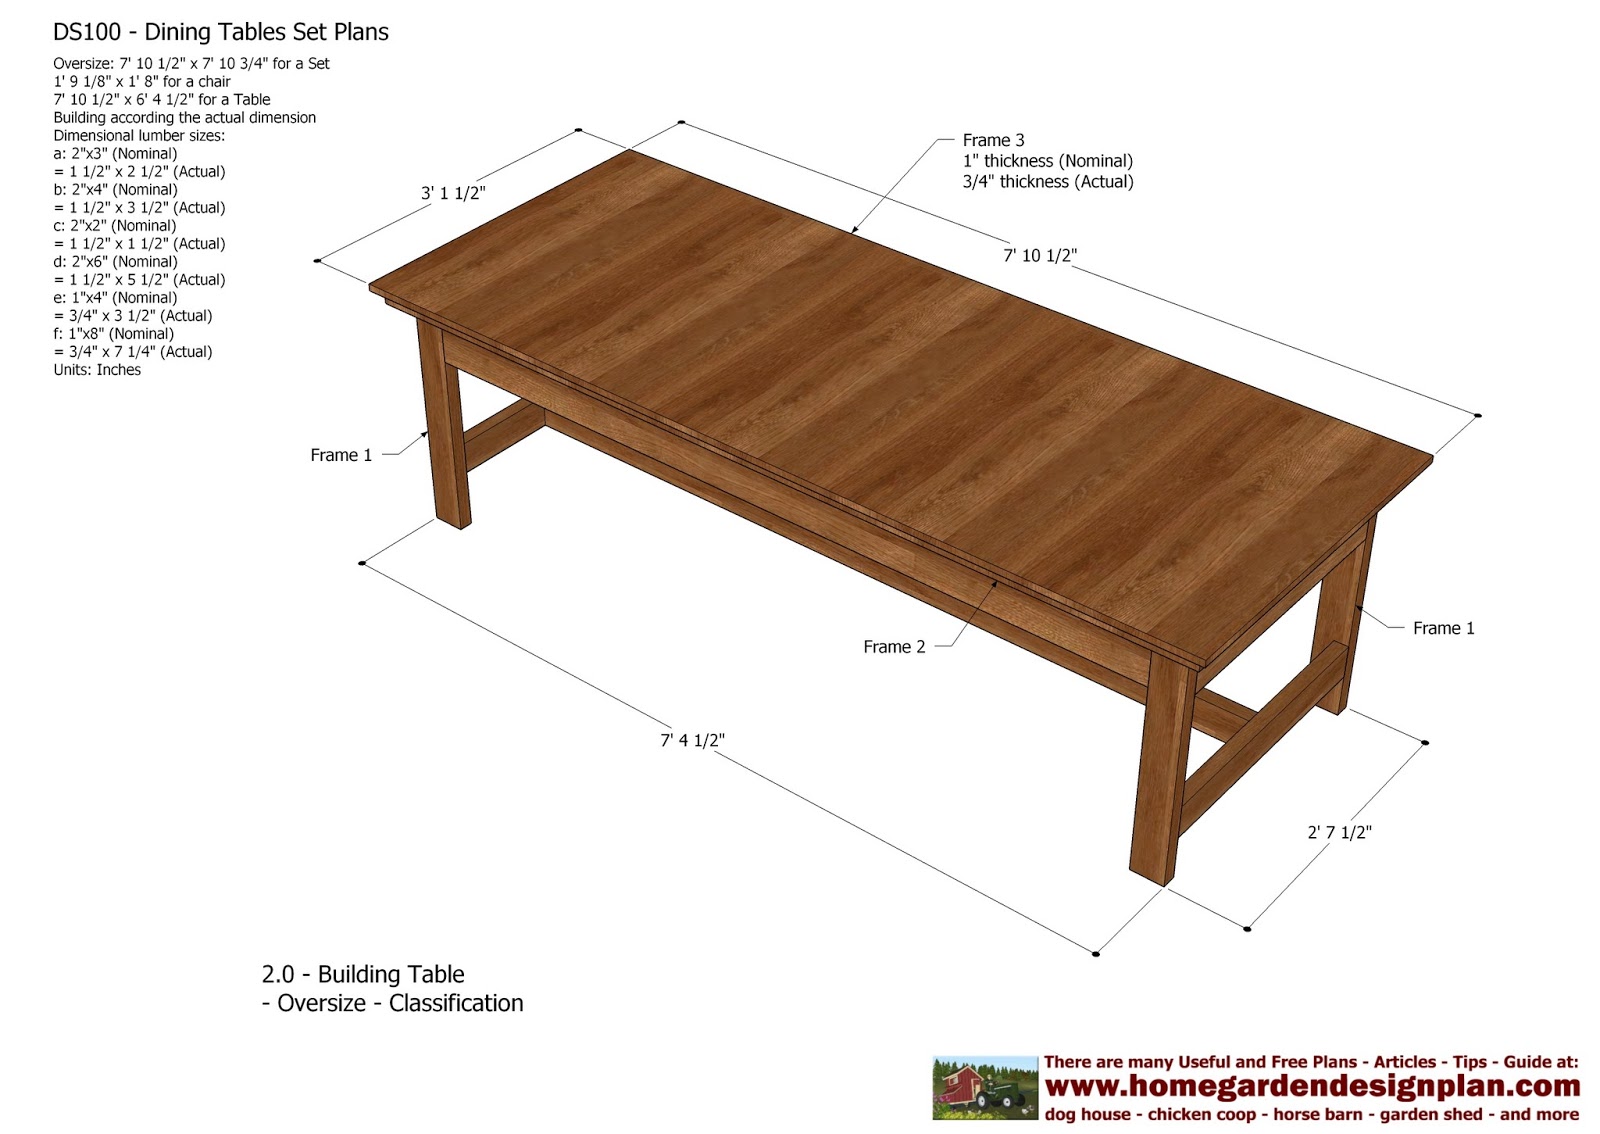 woodwork-outdoor-dining-table-woodworking-plans-pdf-plans